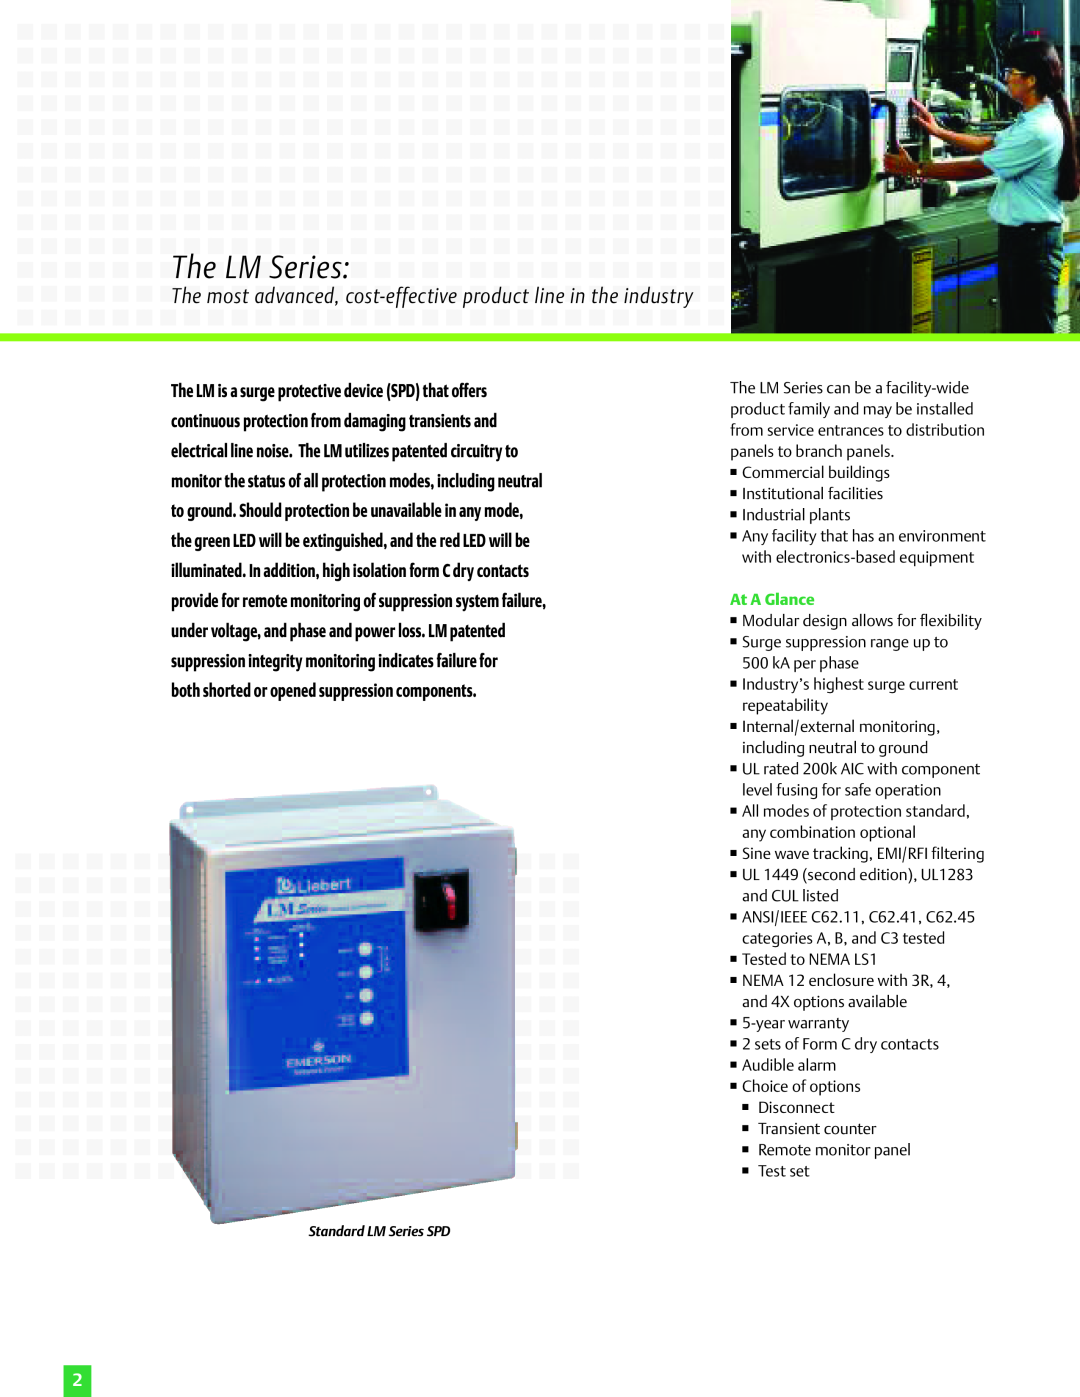 Emerson LM Series manual The LMSeries, The most advanced, cost-effective product line in the industry 